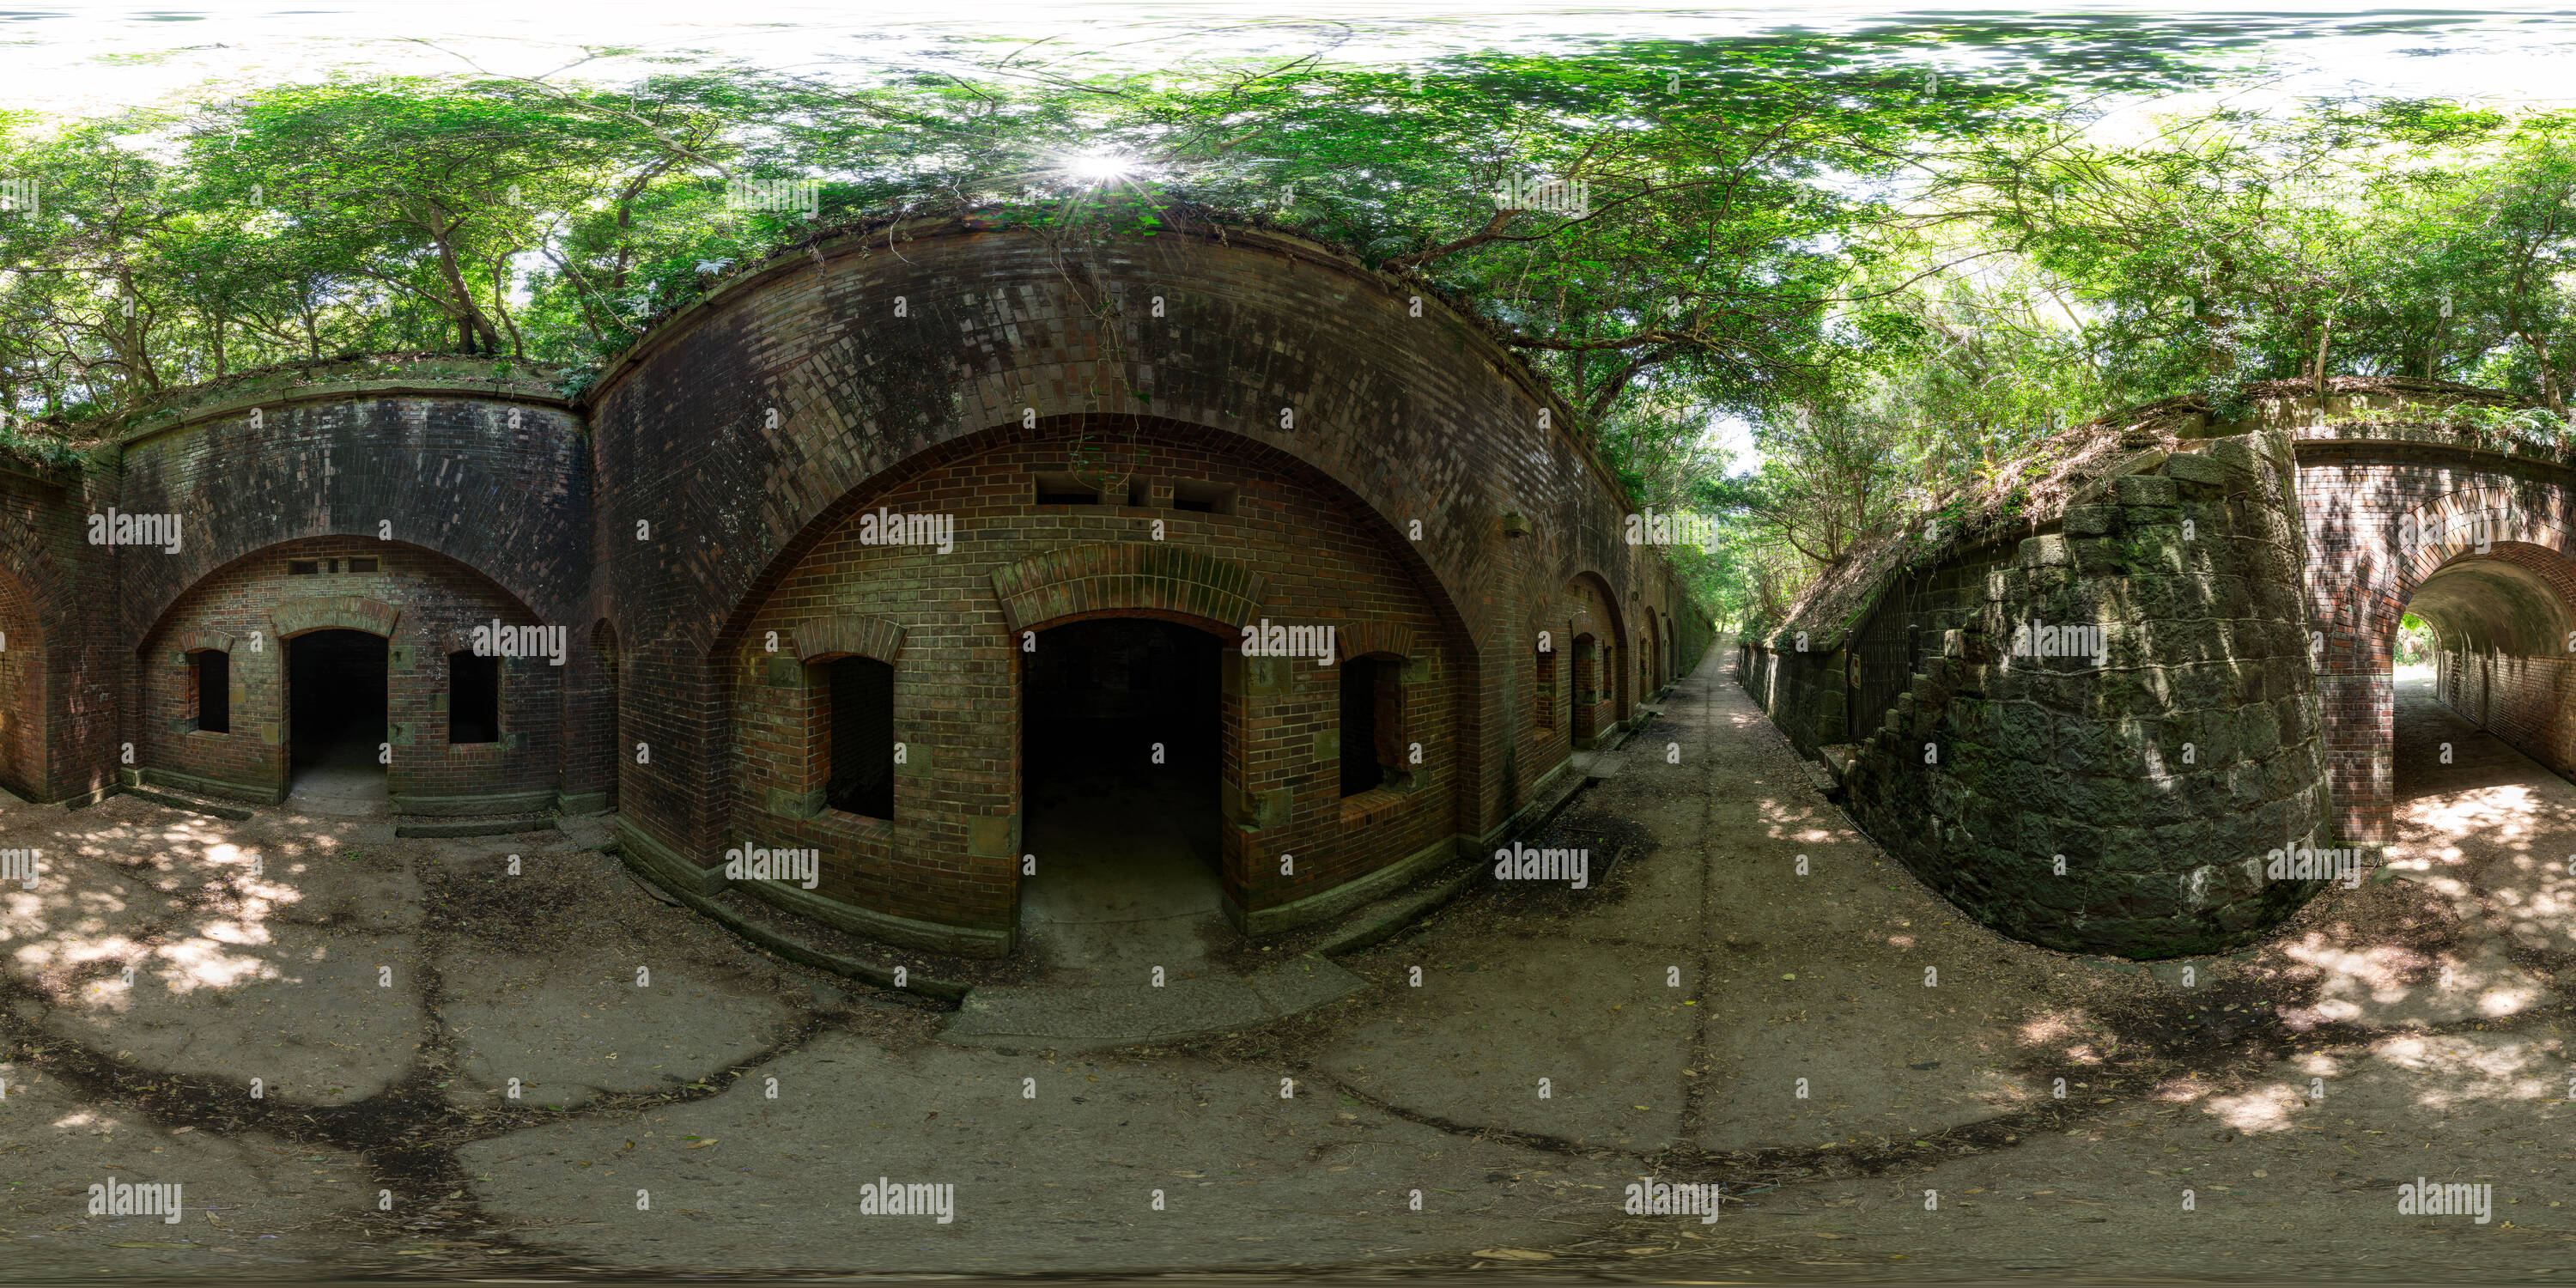 360 degree panoramic view of The ruins of the Japanese troops fort in Tomogashima Island, Japan 06